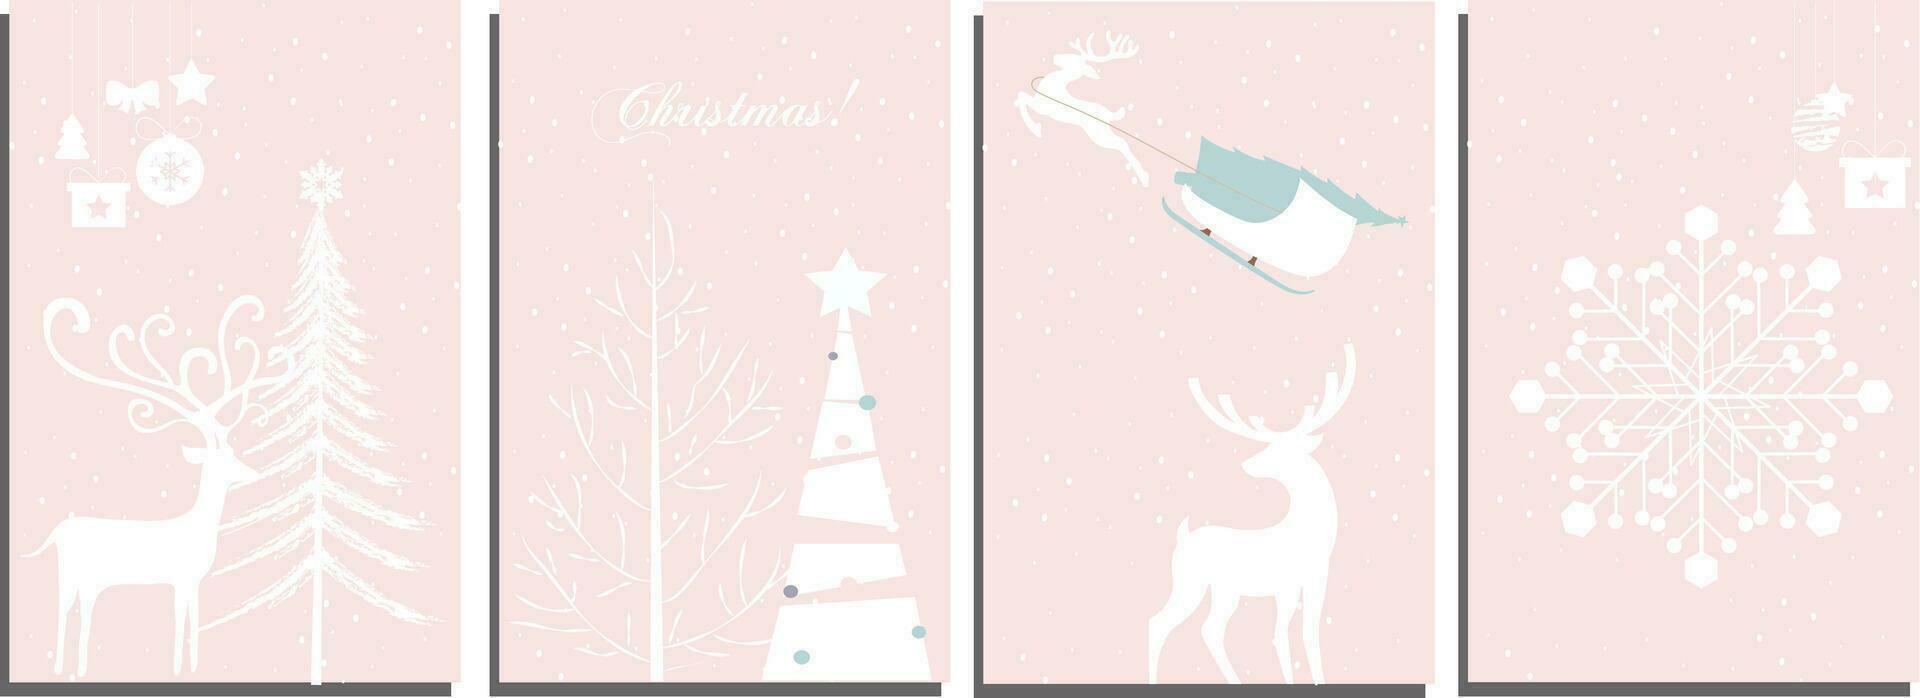 Christmas modern design set in paper cut style with Christmas tree, snowflakes, various gifts, reindeer, christmas train. Christmas card, poster, holiday cover or banner vector